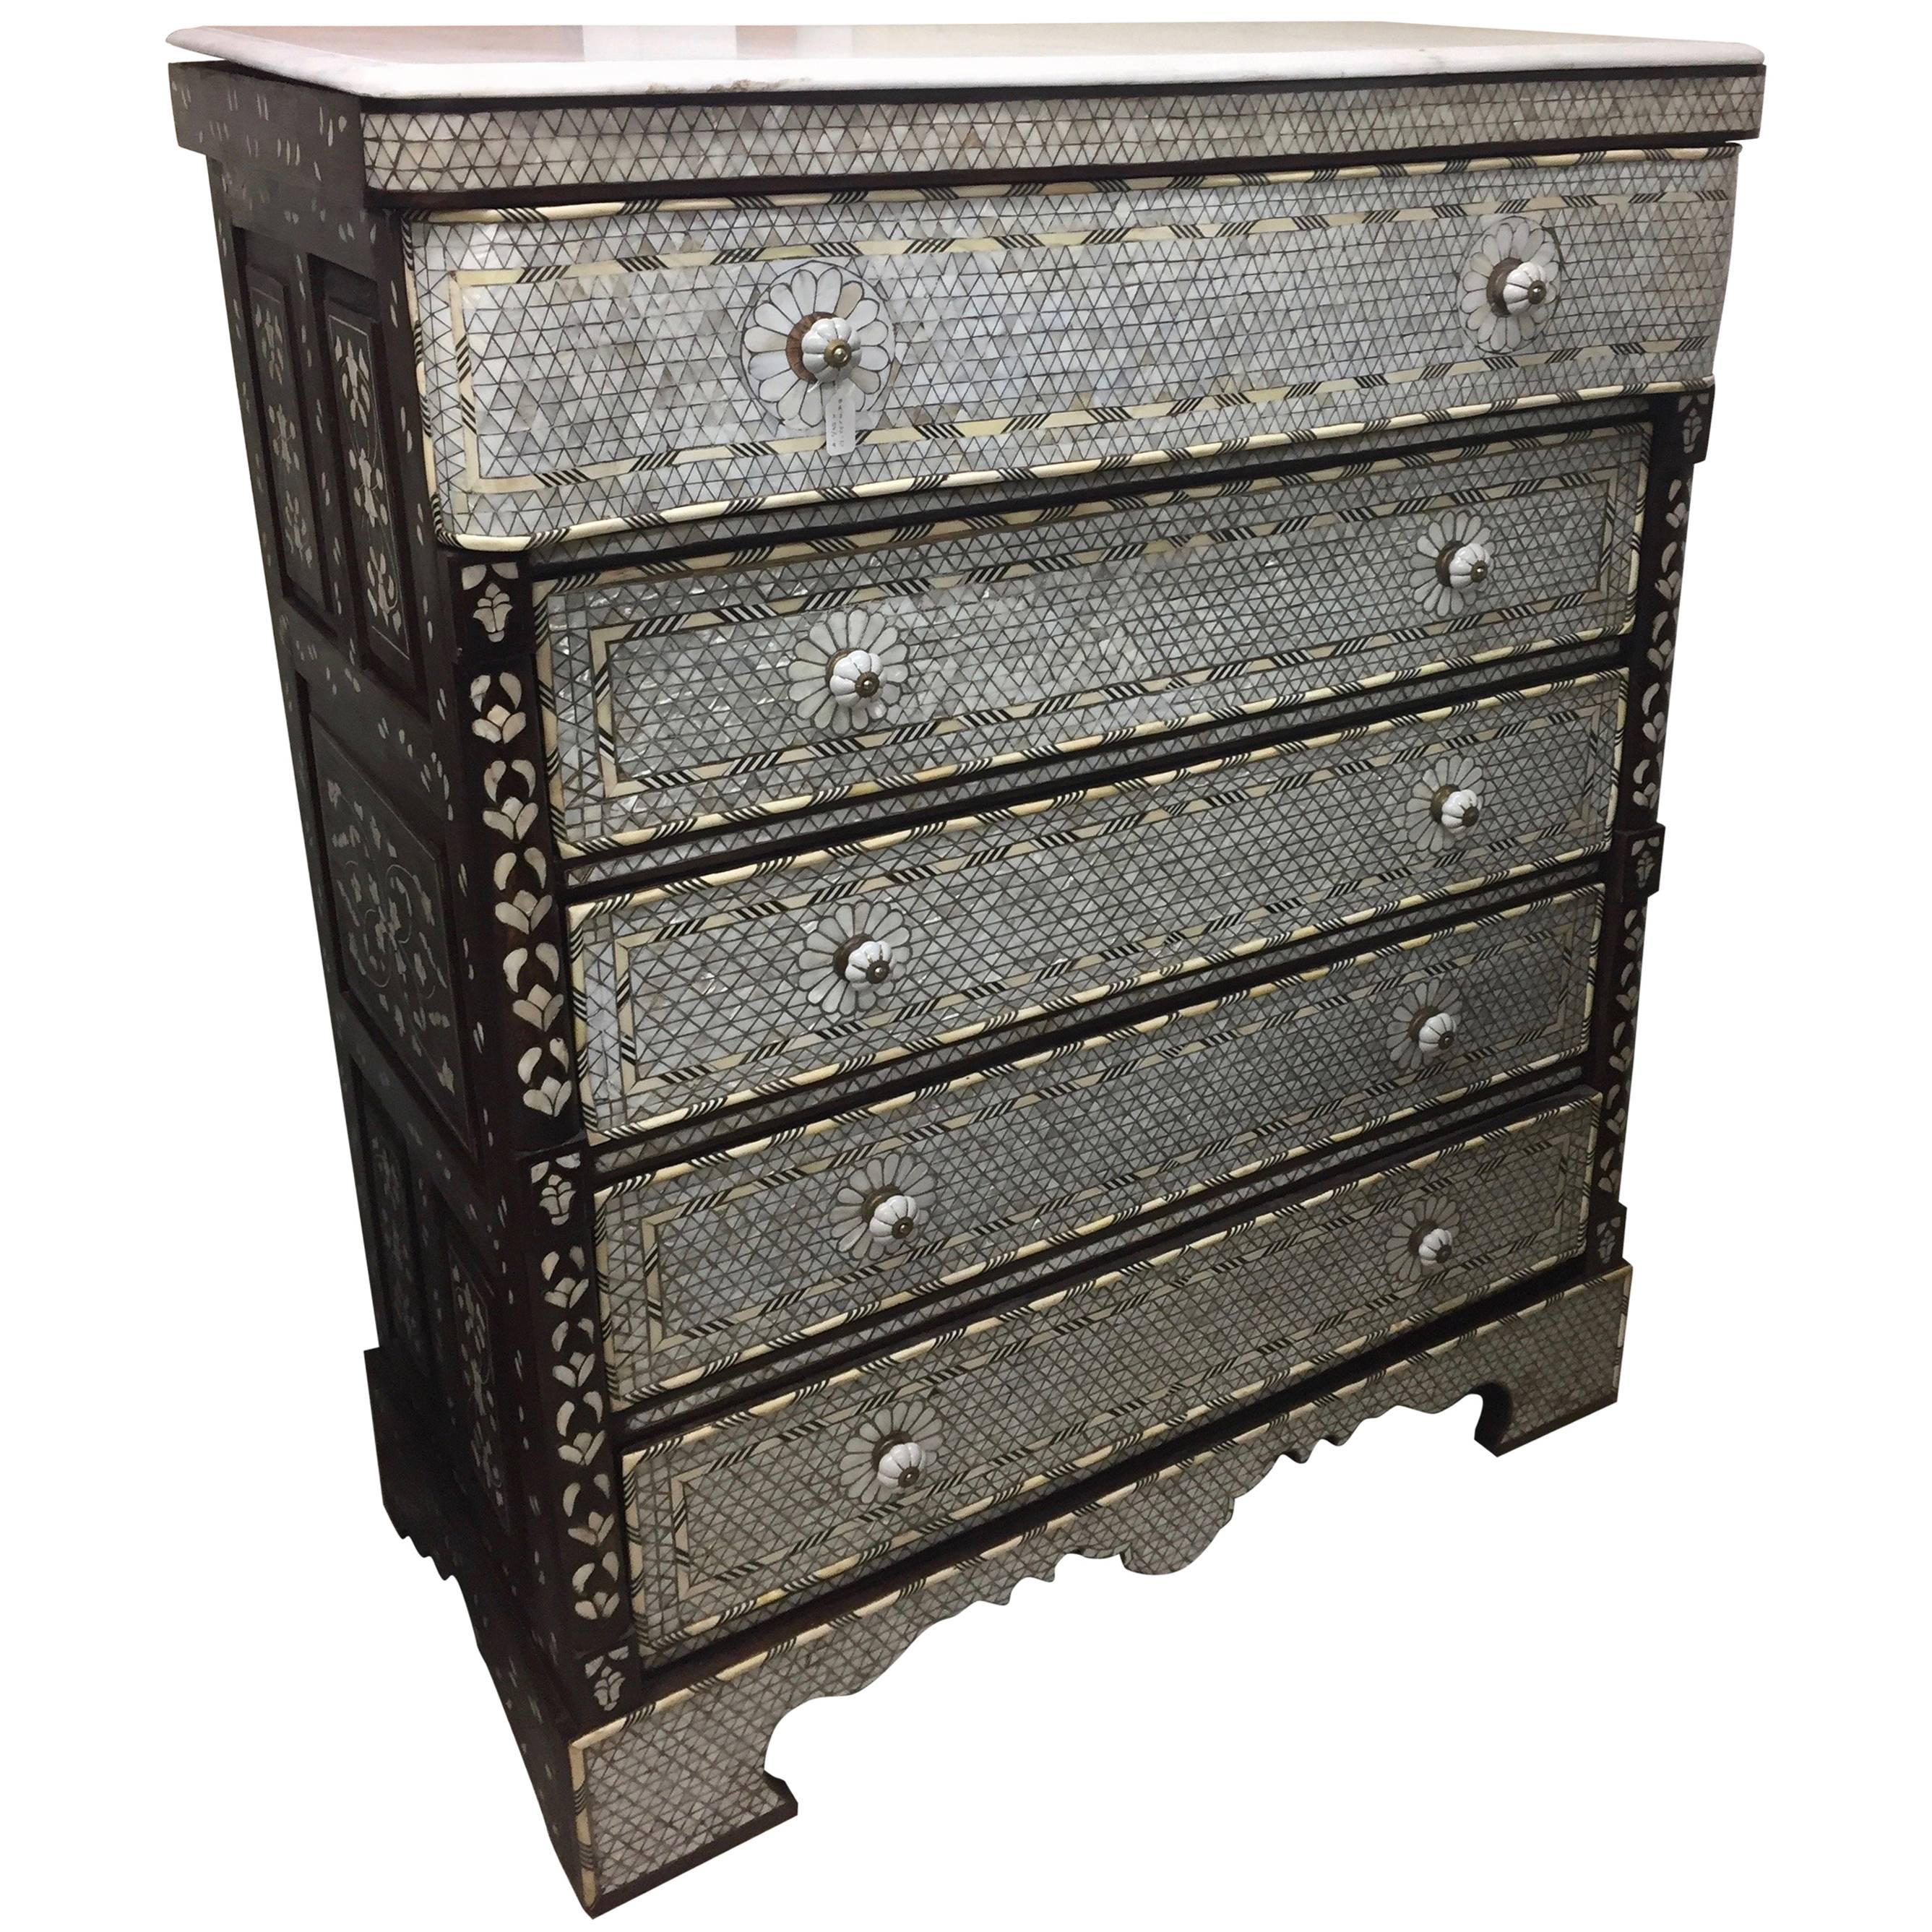 Syrian Mother-of-Pearl Five-Drawer Dresser Haskell Antiques For Sale